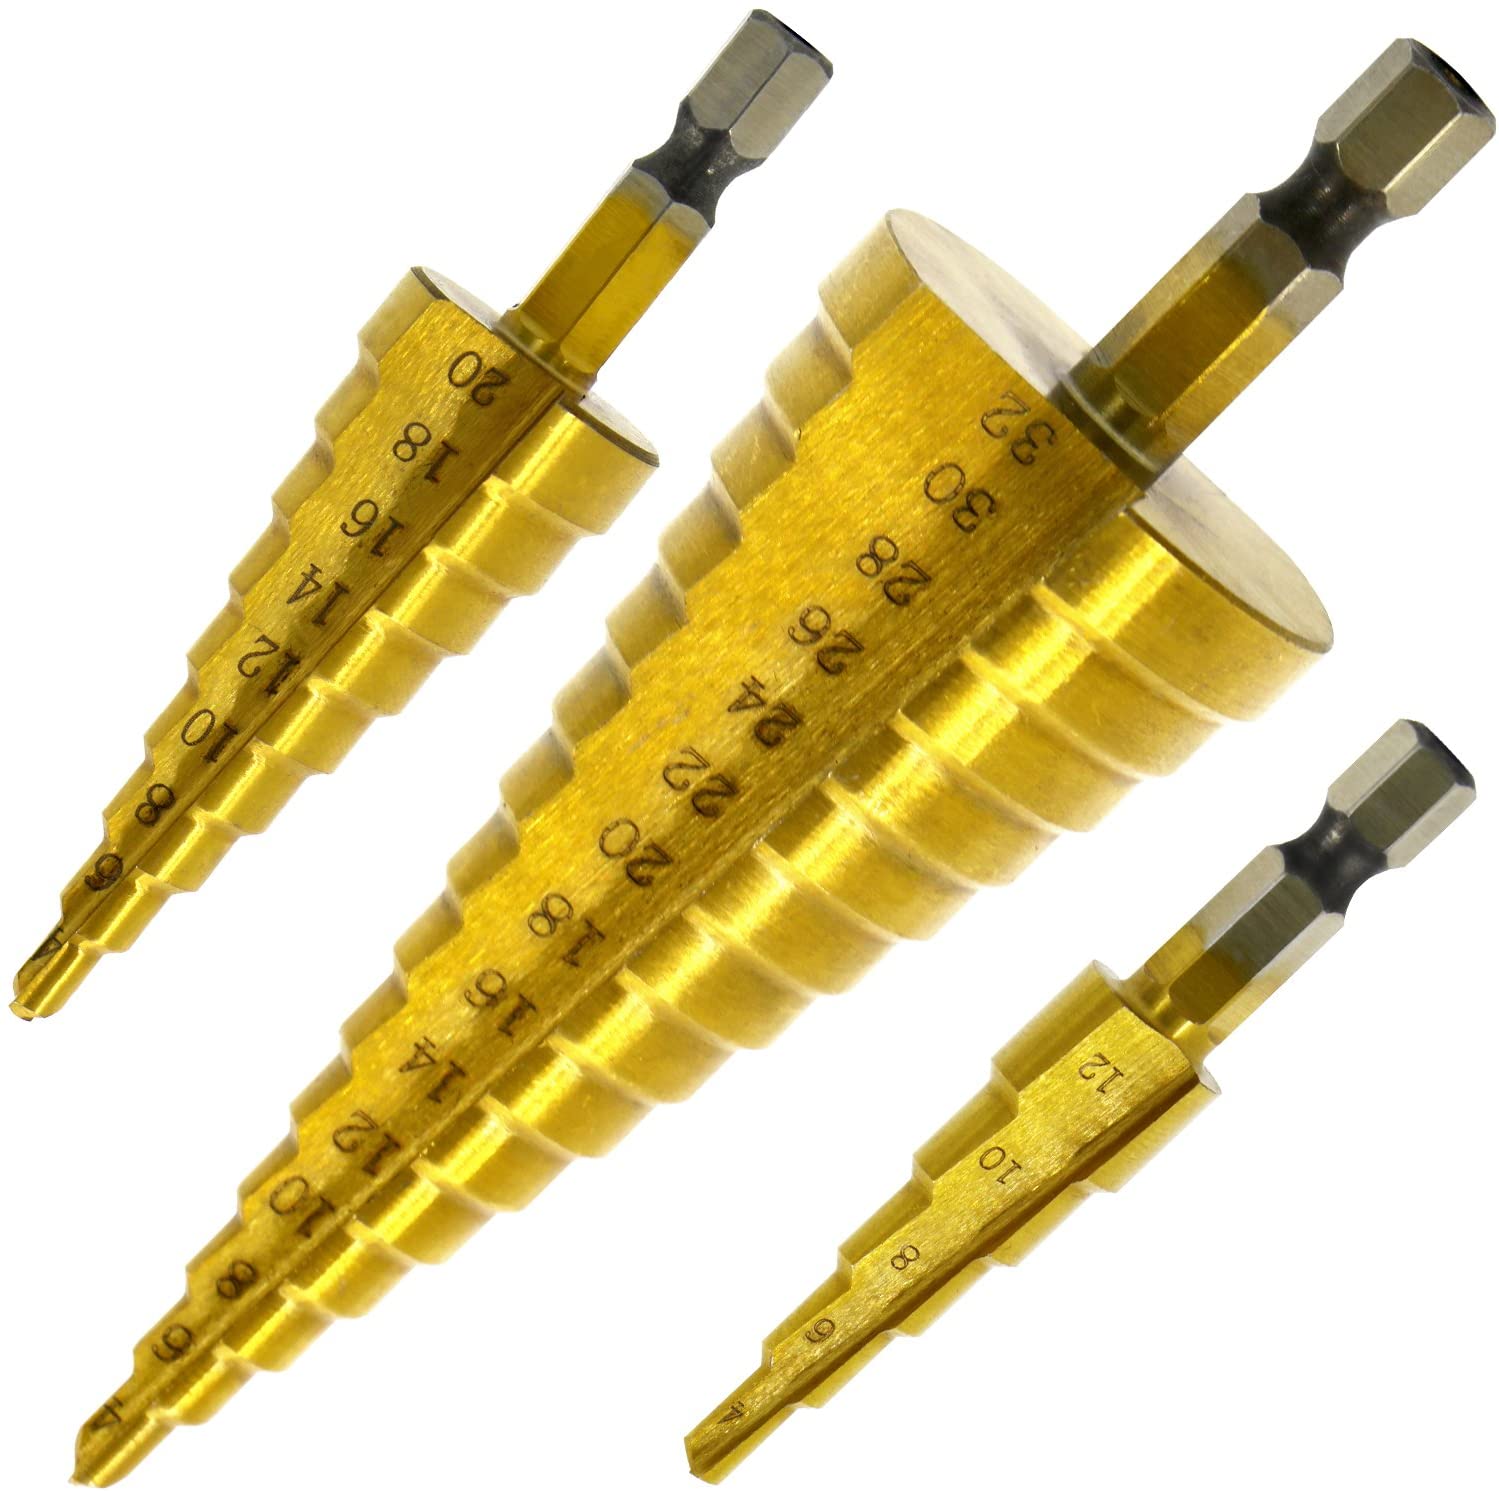 Set Of 3 Staggered Countersink Drill Bit, Hss Stainless Steel, Titanium Conical Triangle, With Hexagonal Shank, For Screwdriver Drilling On Steel, Brass, Wood, Plastic - image 1 of 7